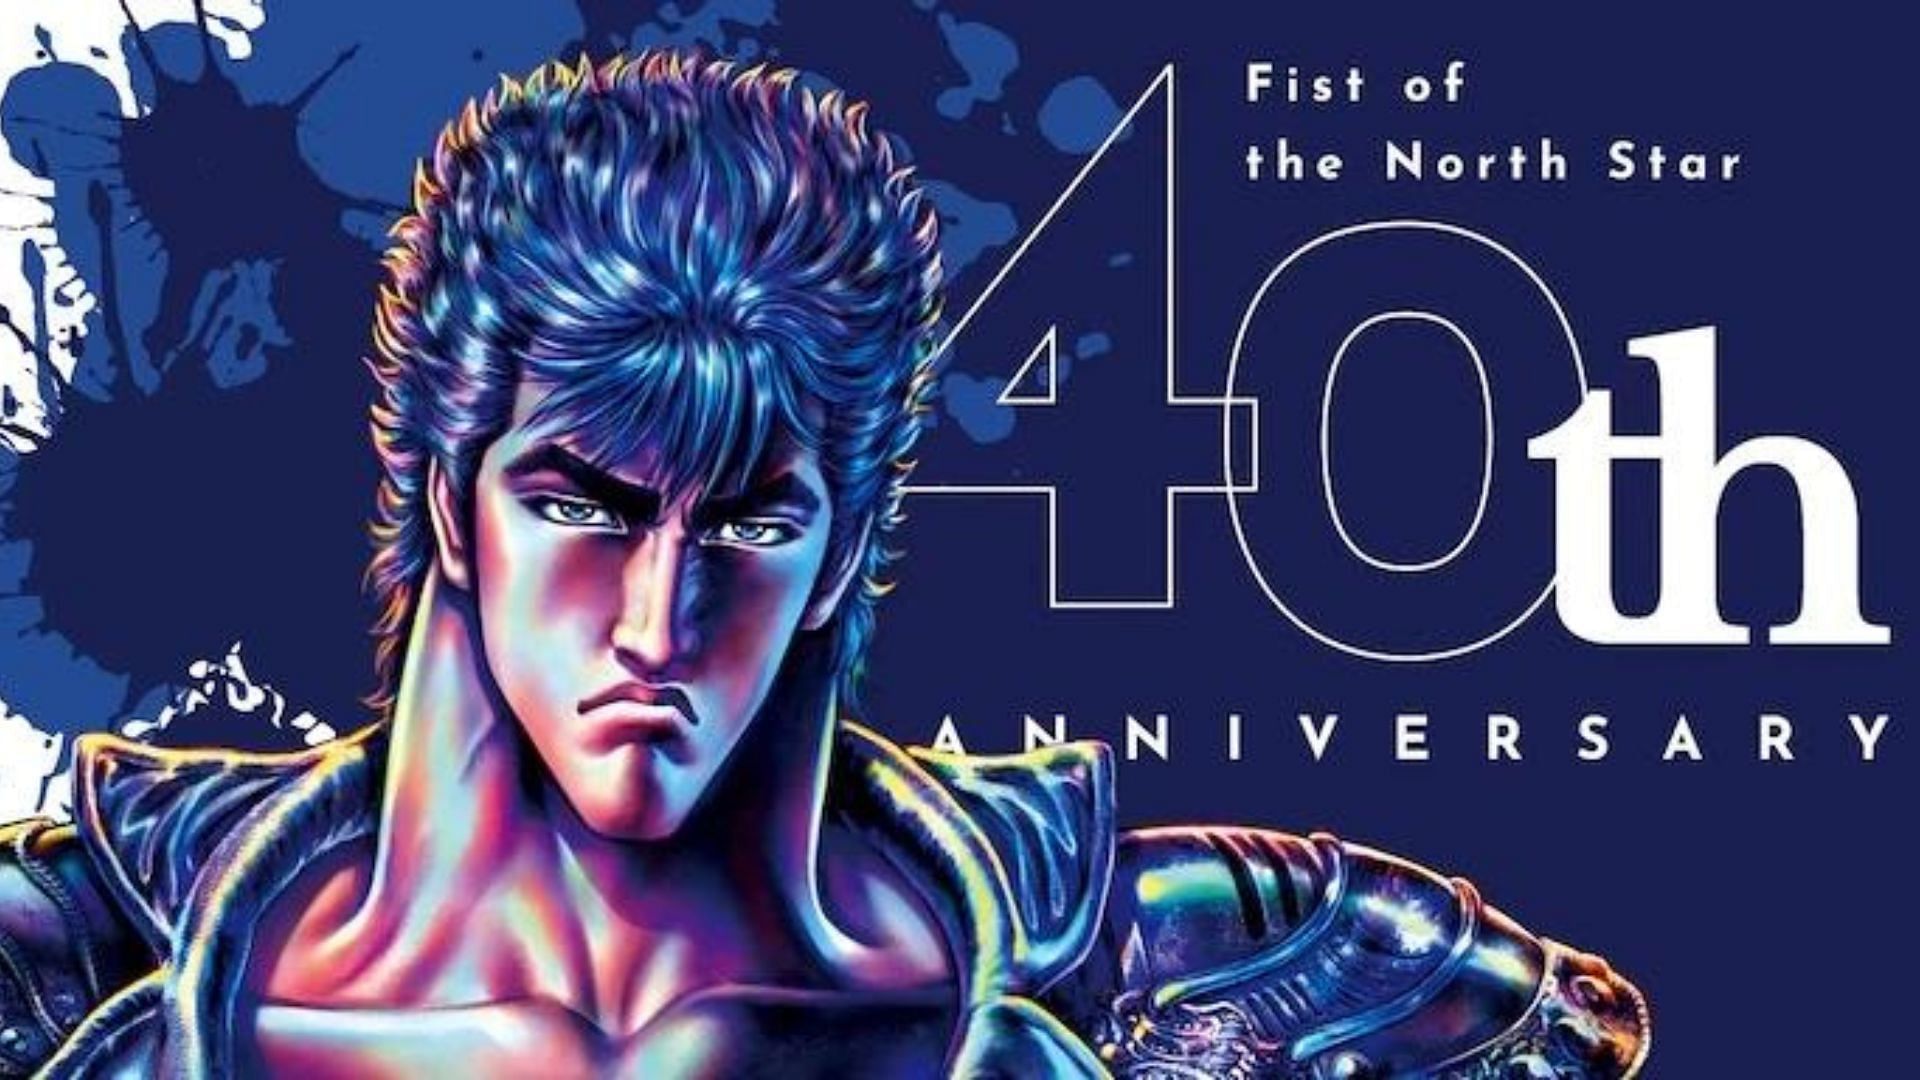 Fist of the North Star manga receives a new anime project